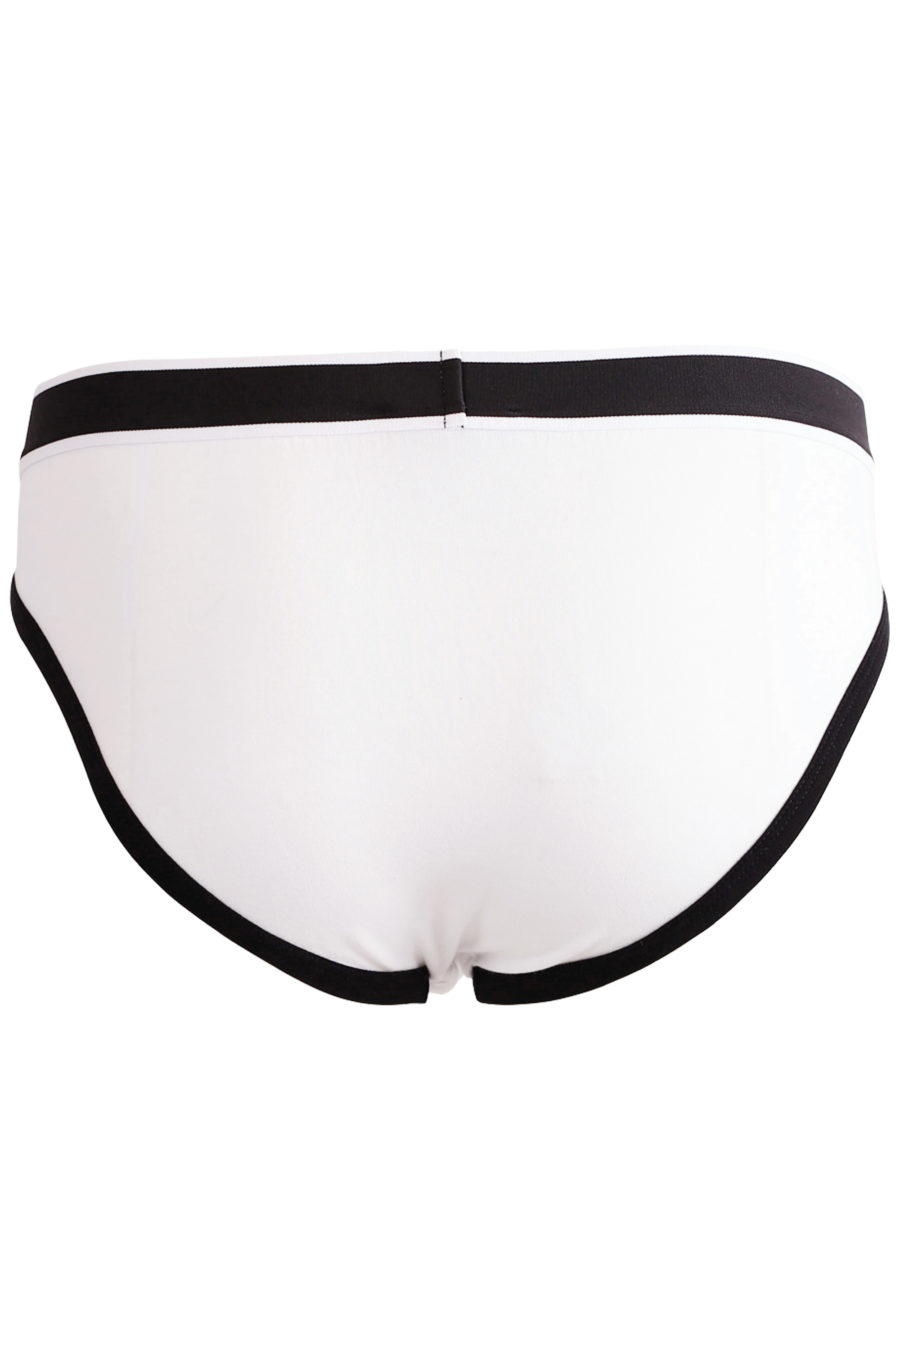 Pack of two white briefs with logo on waistband - e9f007a338a39cff16e19c63aa99edf112a2c0cf